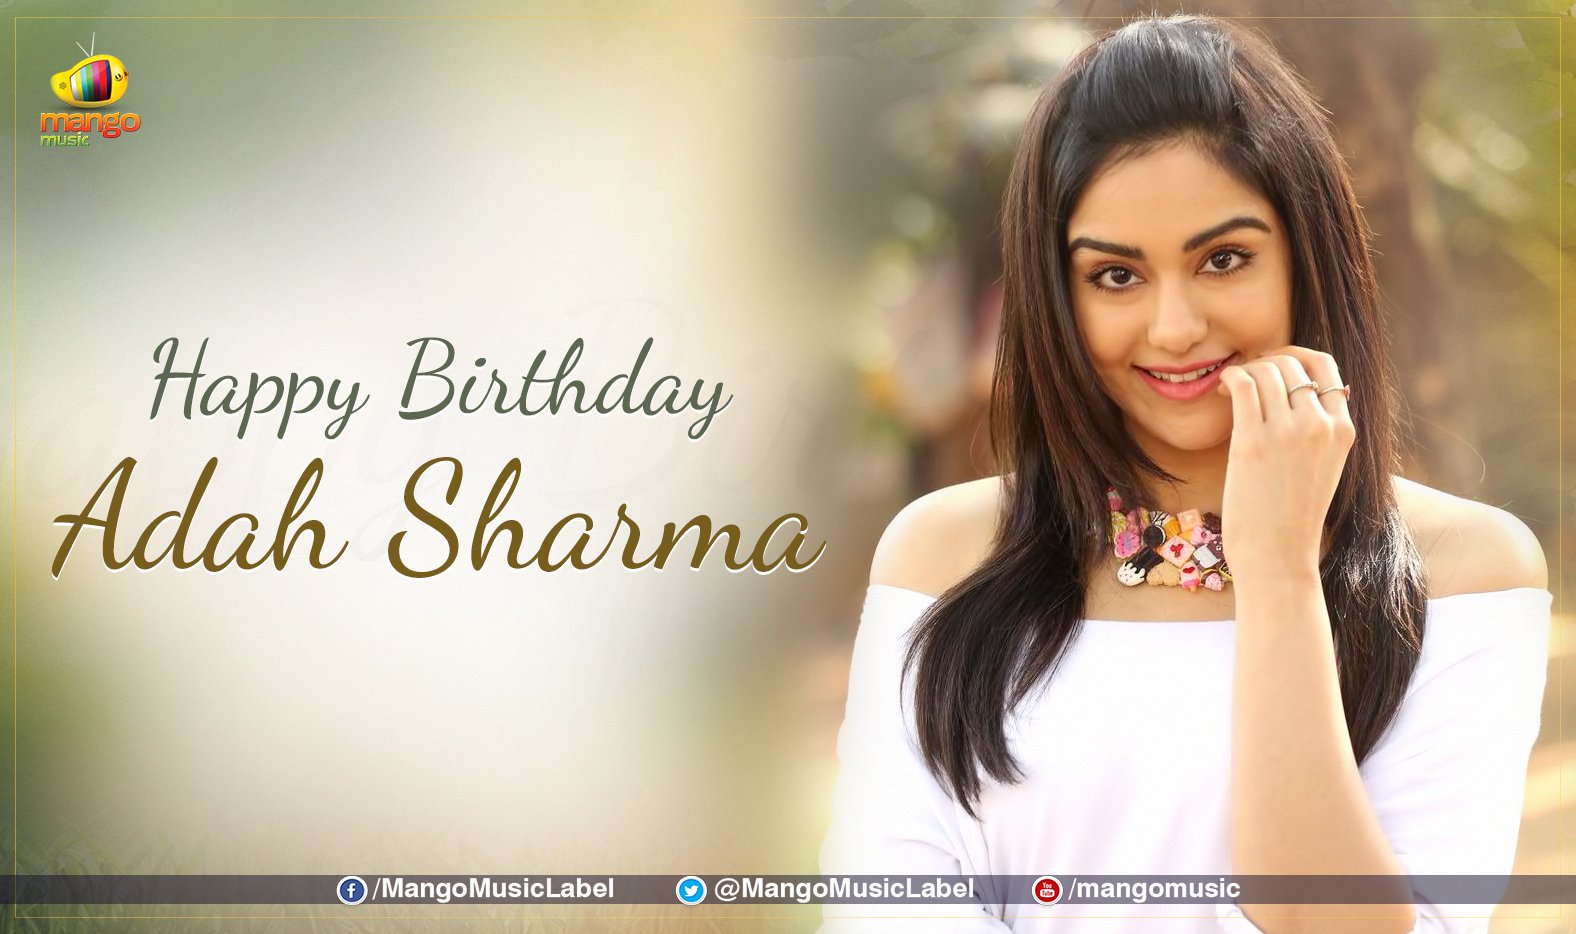 Join us in wishing the gorgeous a very happy birthday! 